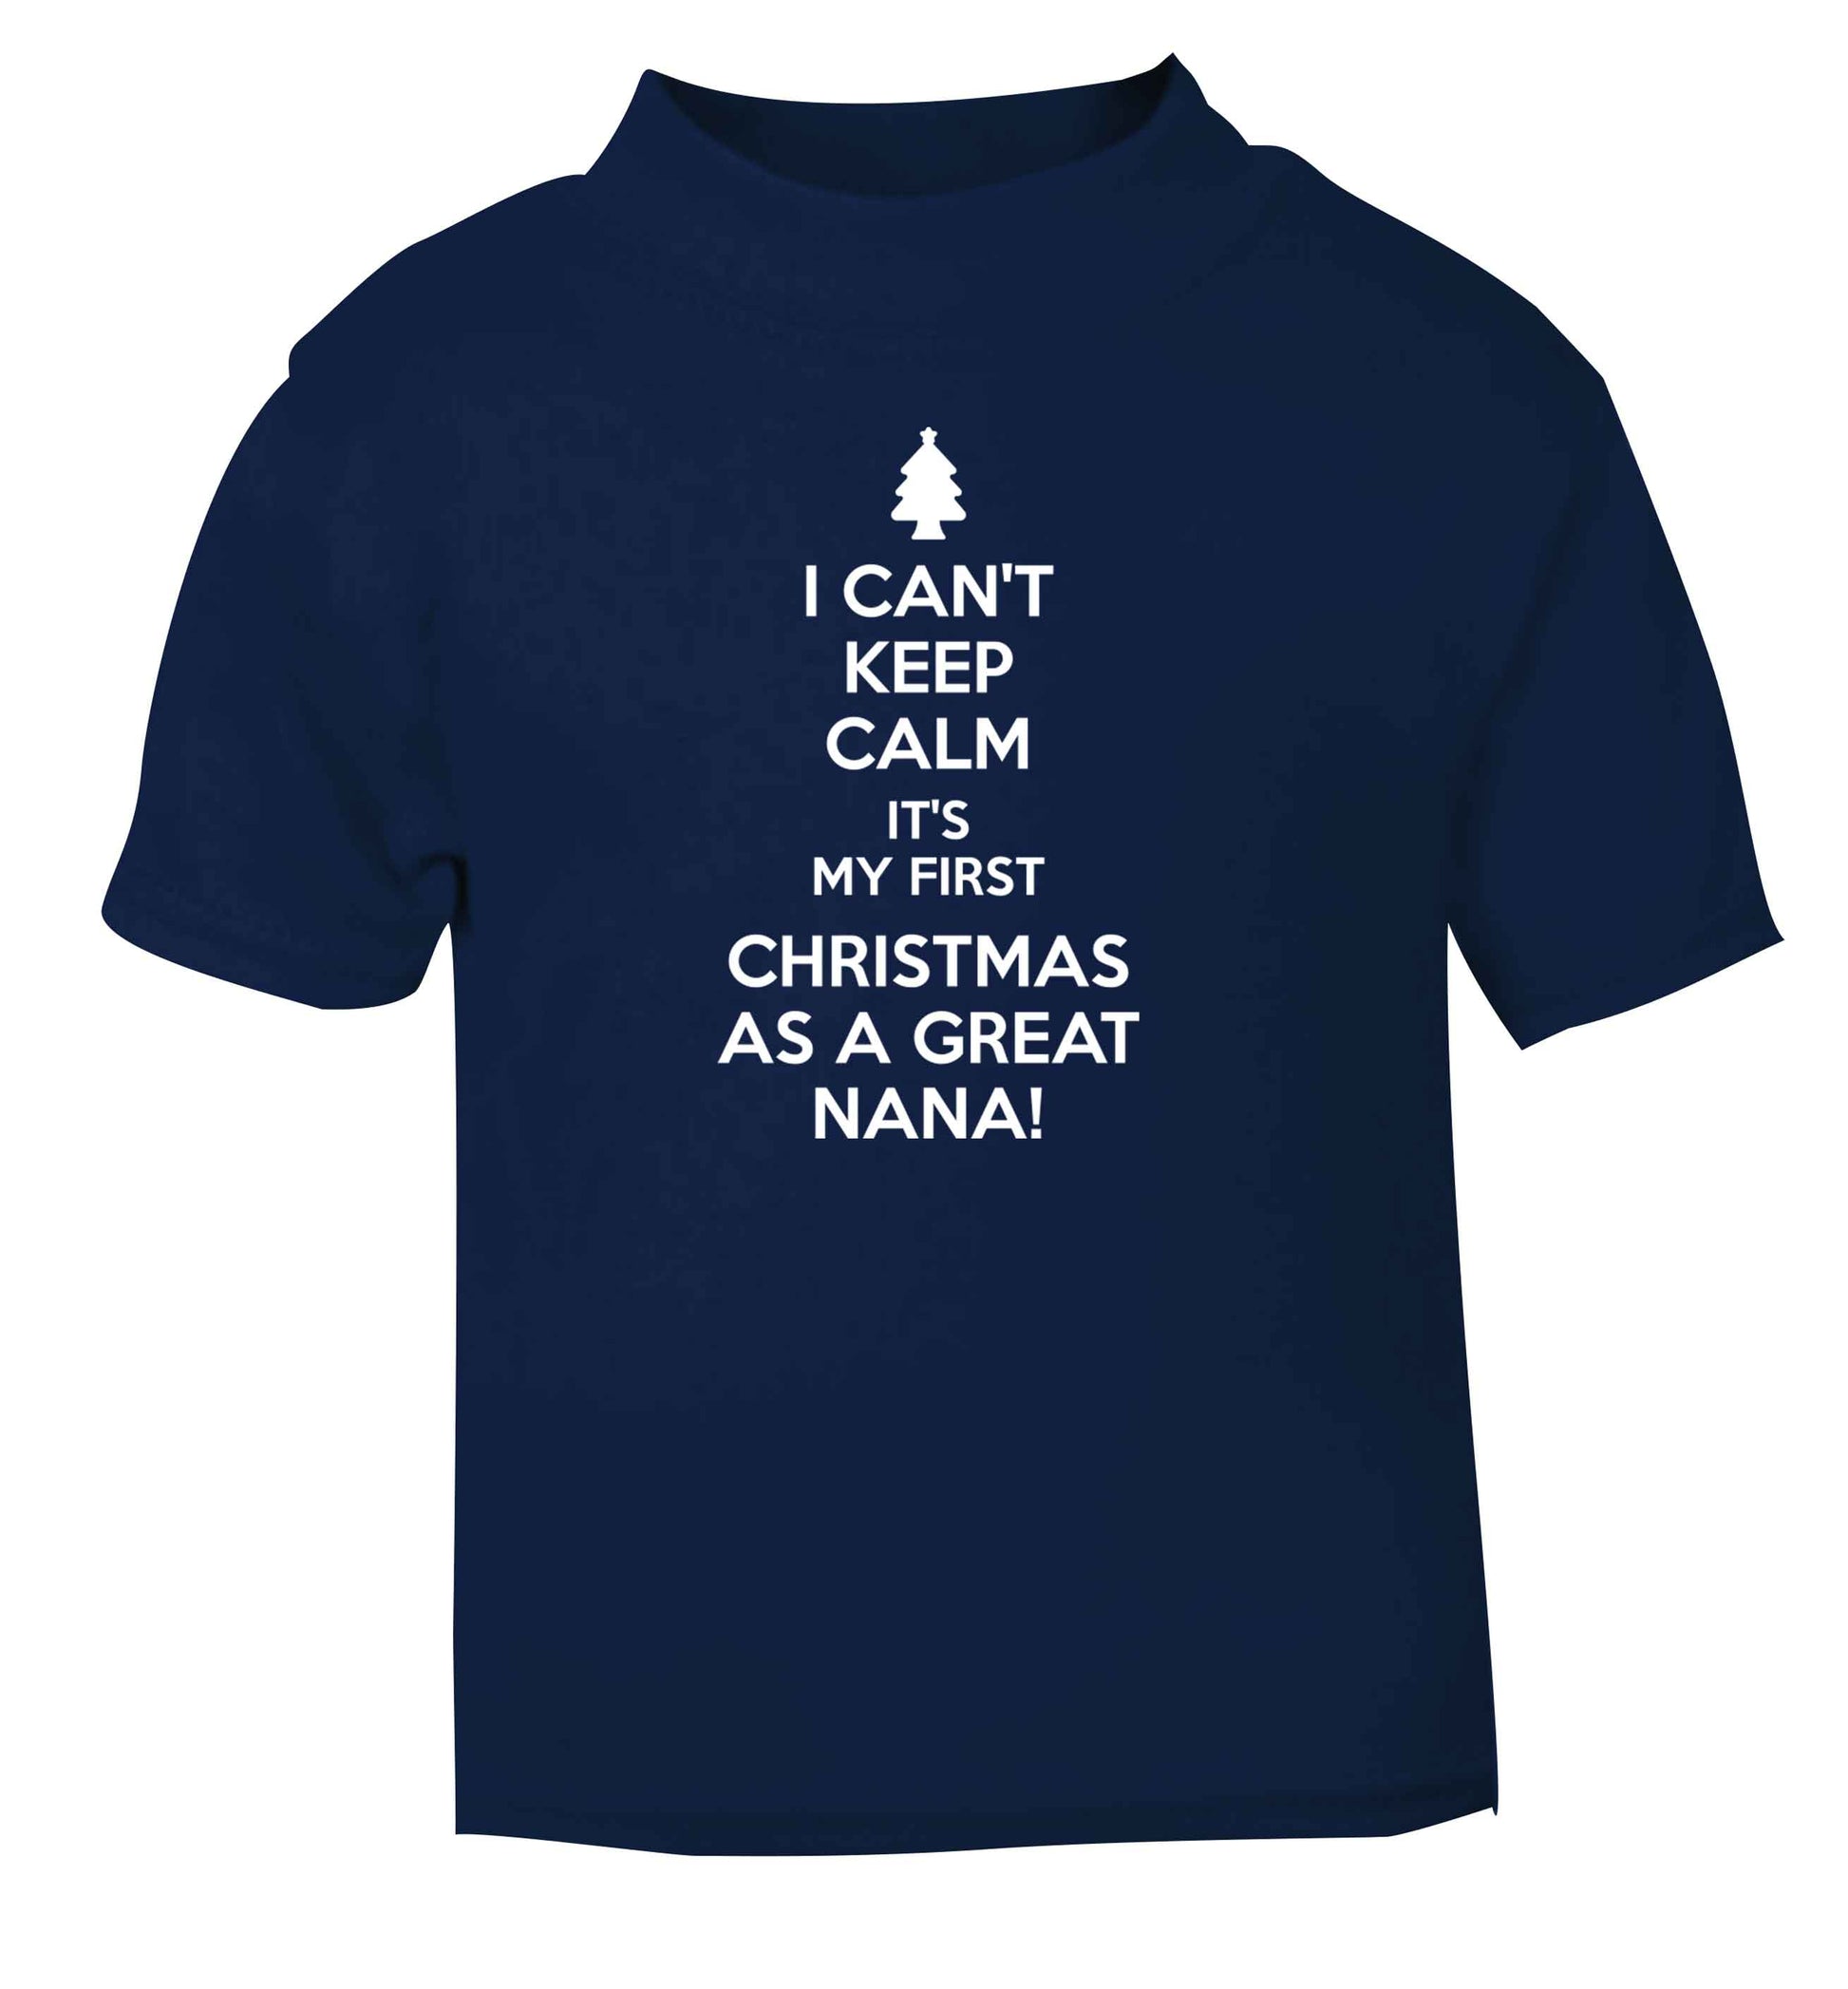 I can't keep calm it's my first Christmas as a great nana! navy Baby Toddler Tshirt 2 Years